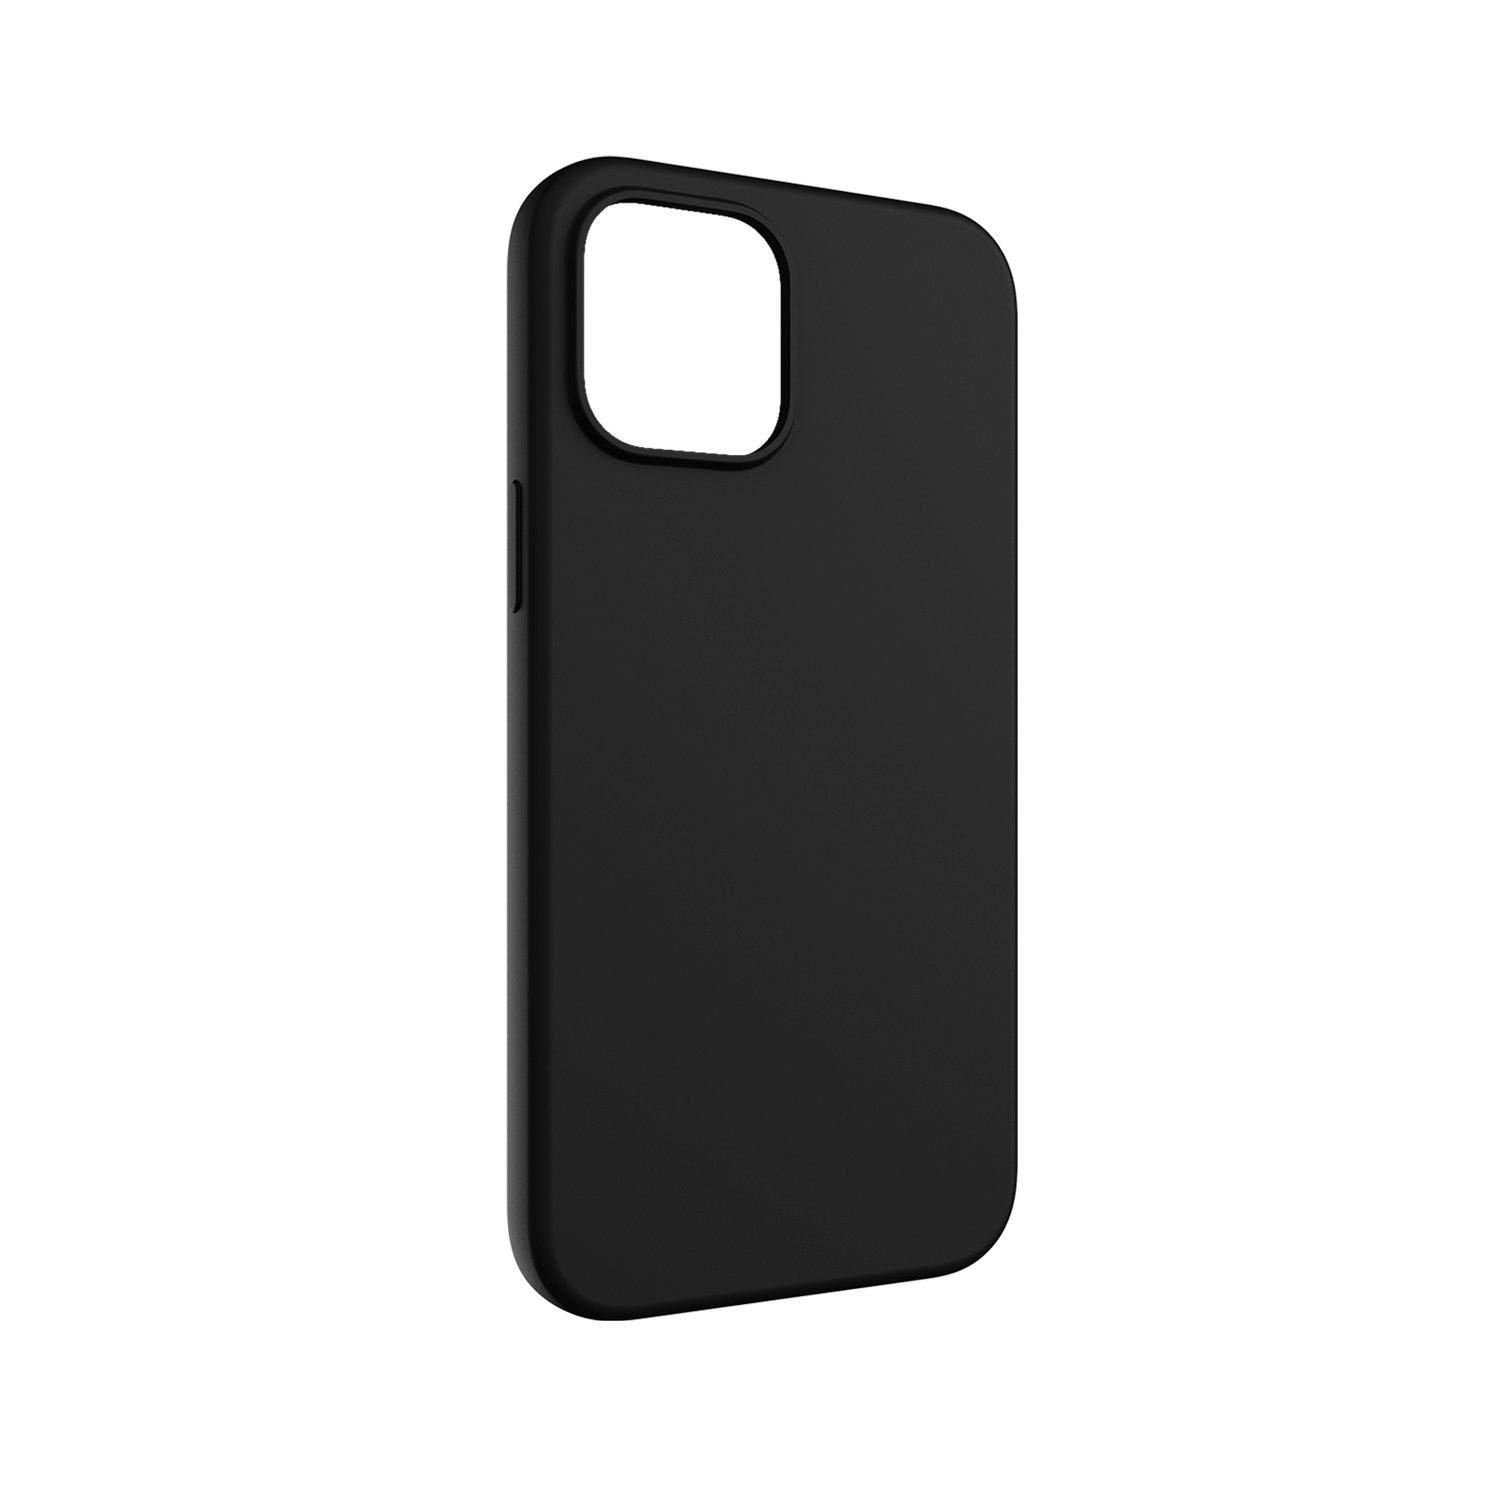 SwitchEasy Skin Case for iPhone 12 Pro Max 6.7"(2020)